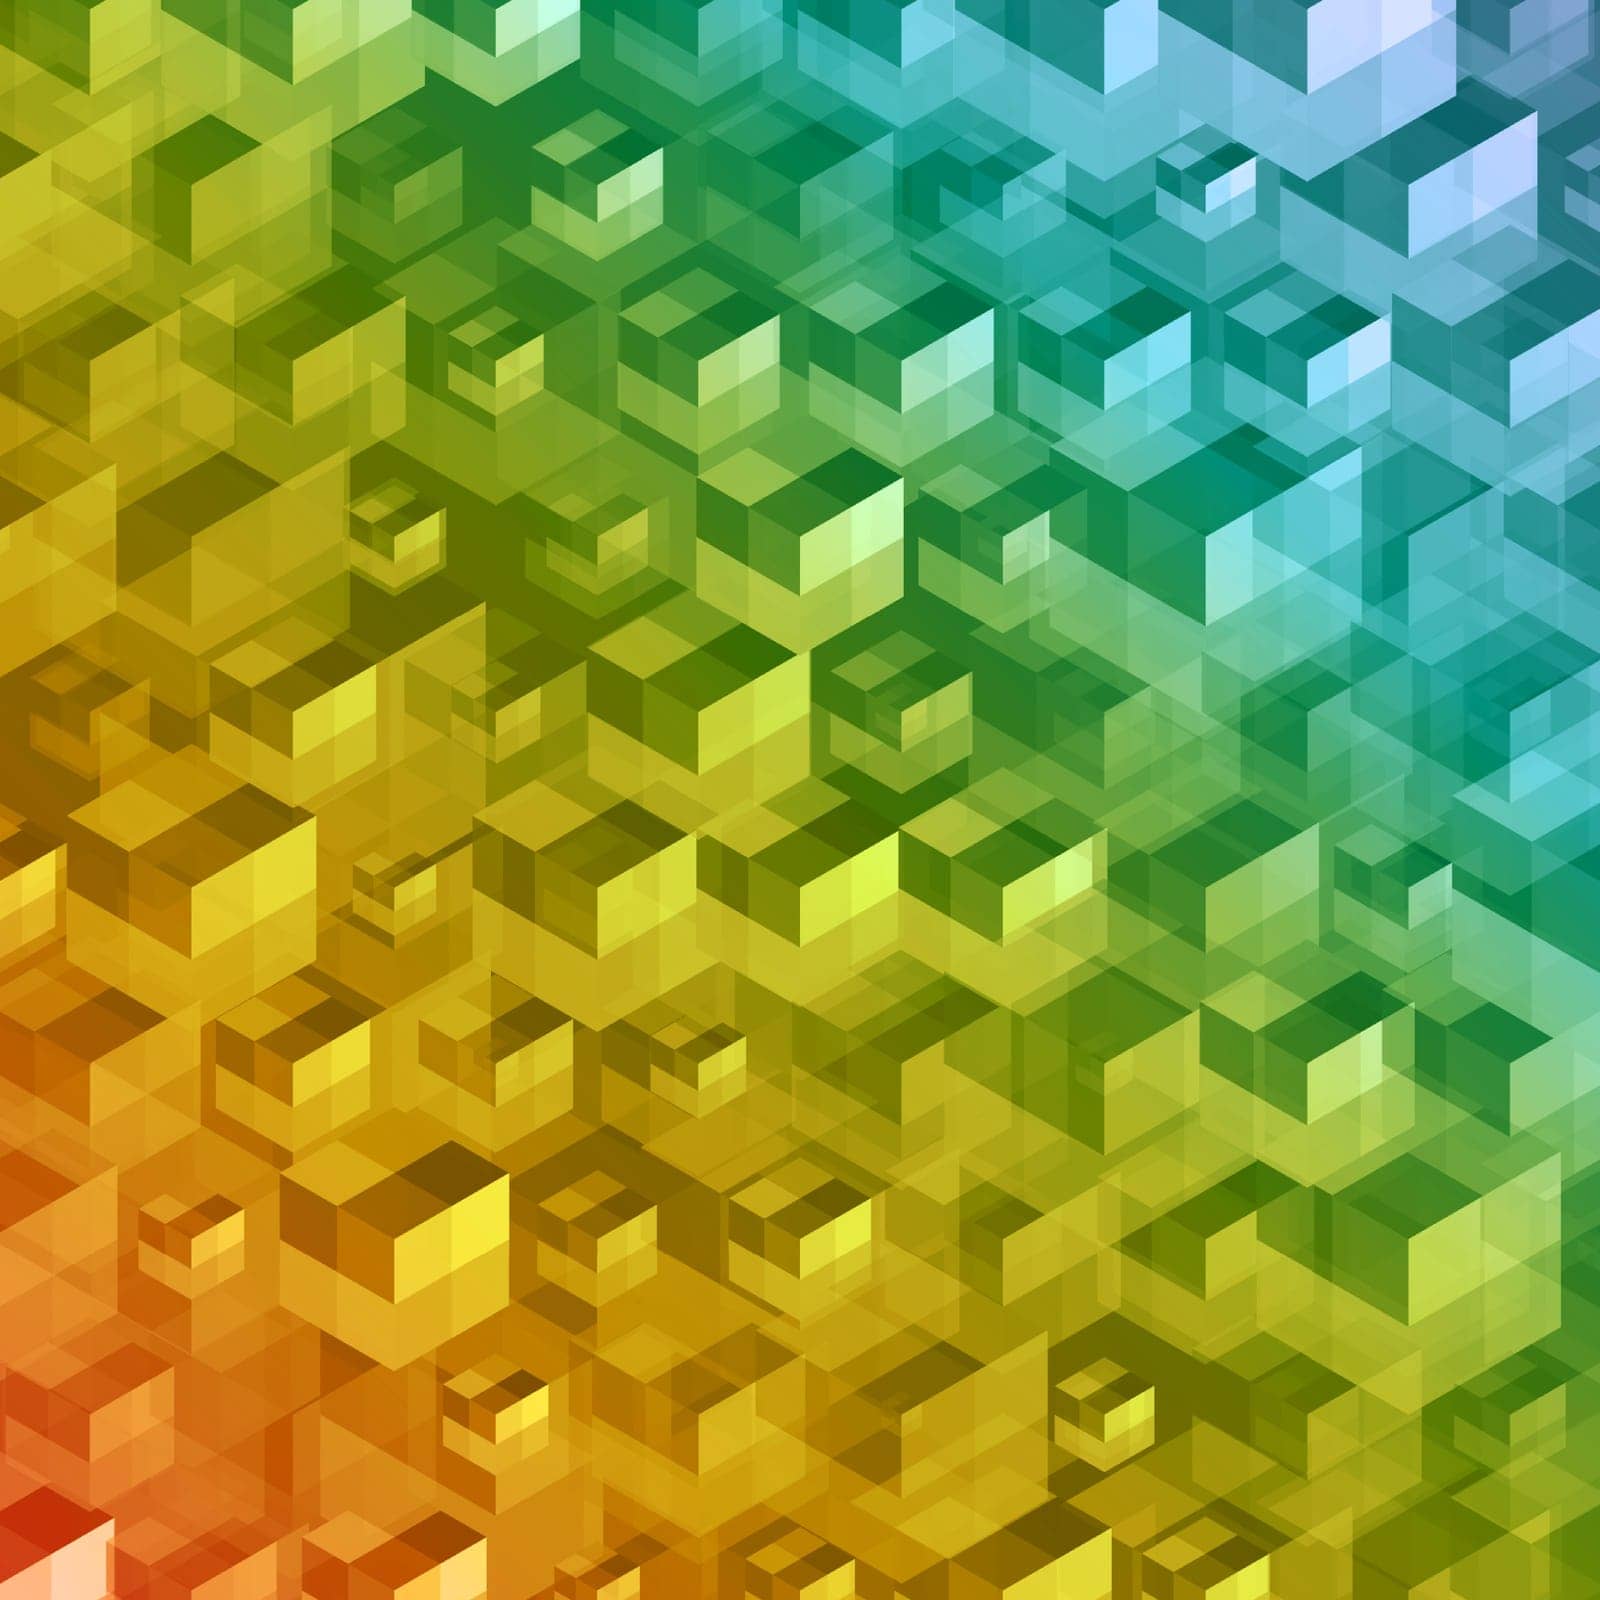 A myriad of small squares arranged in an abstract pattern.